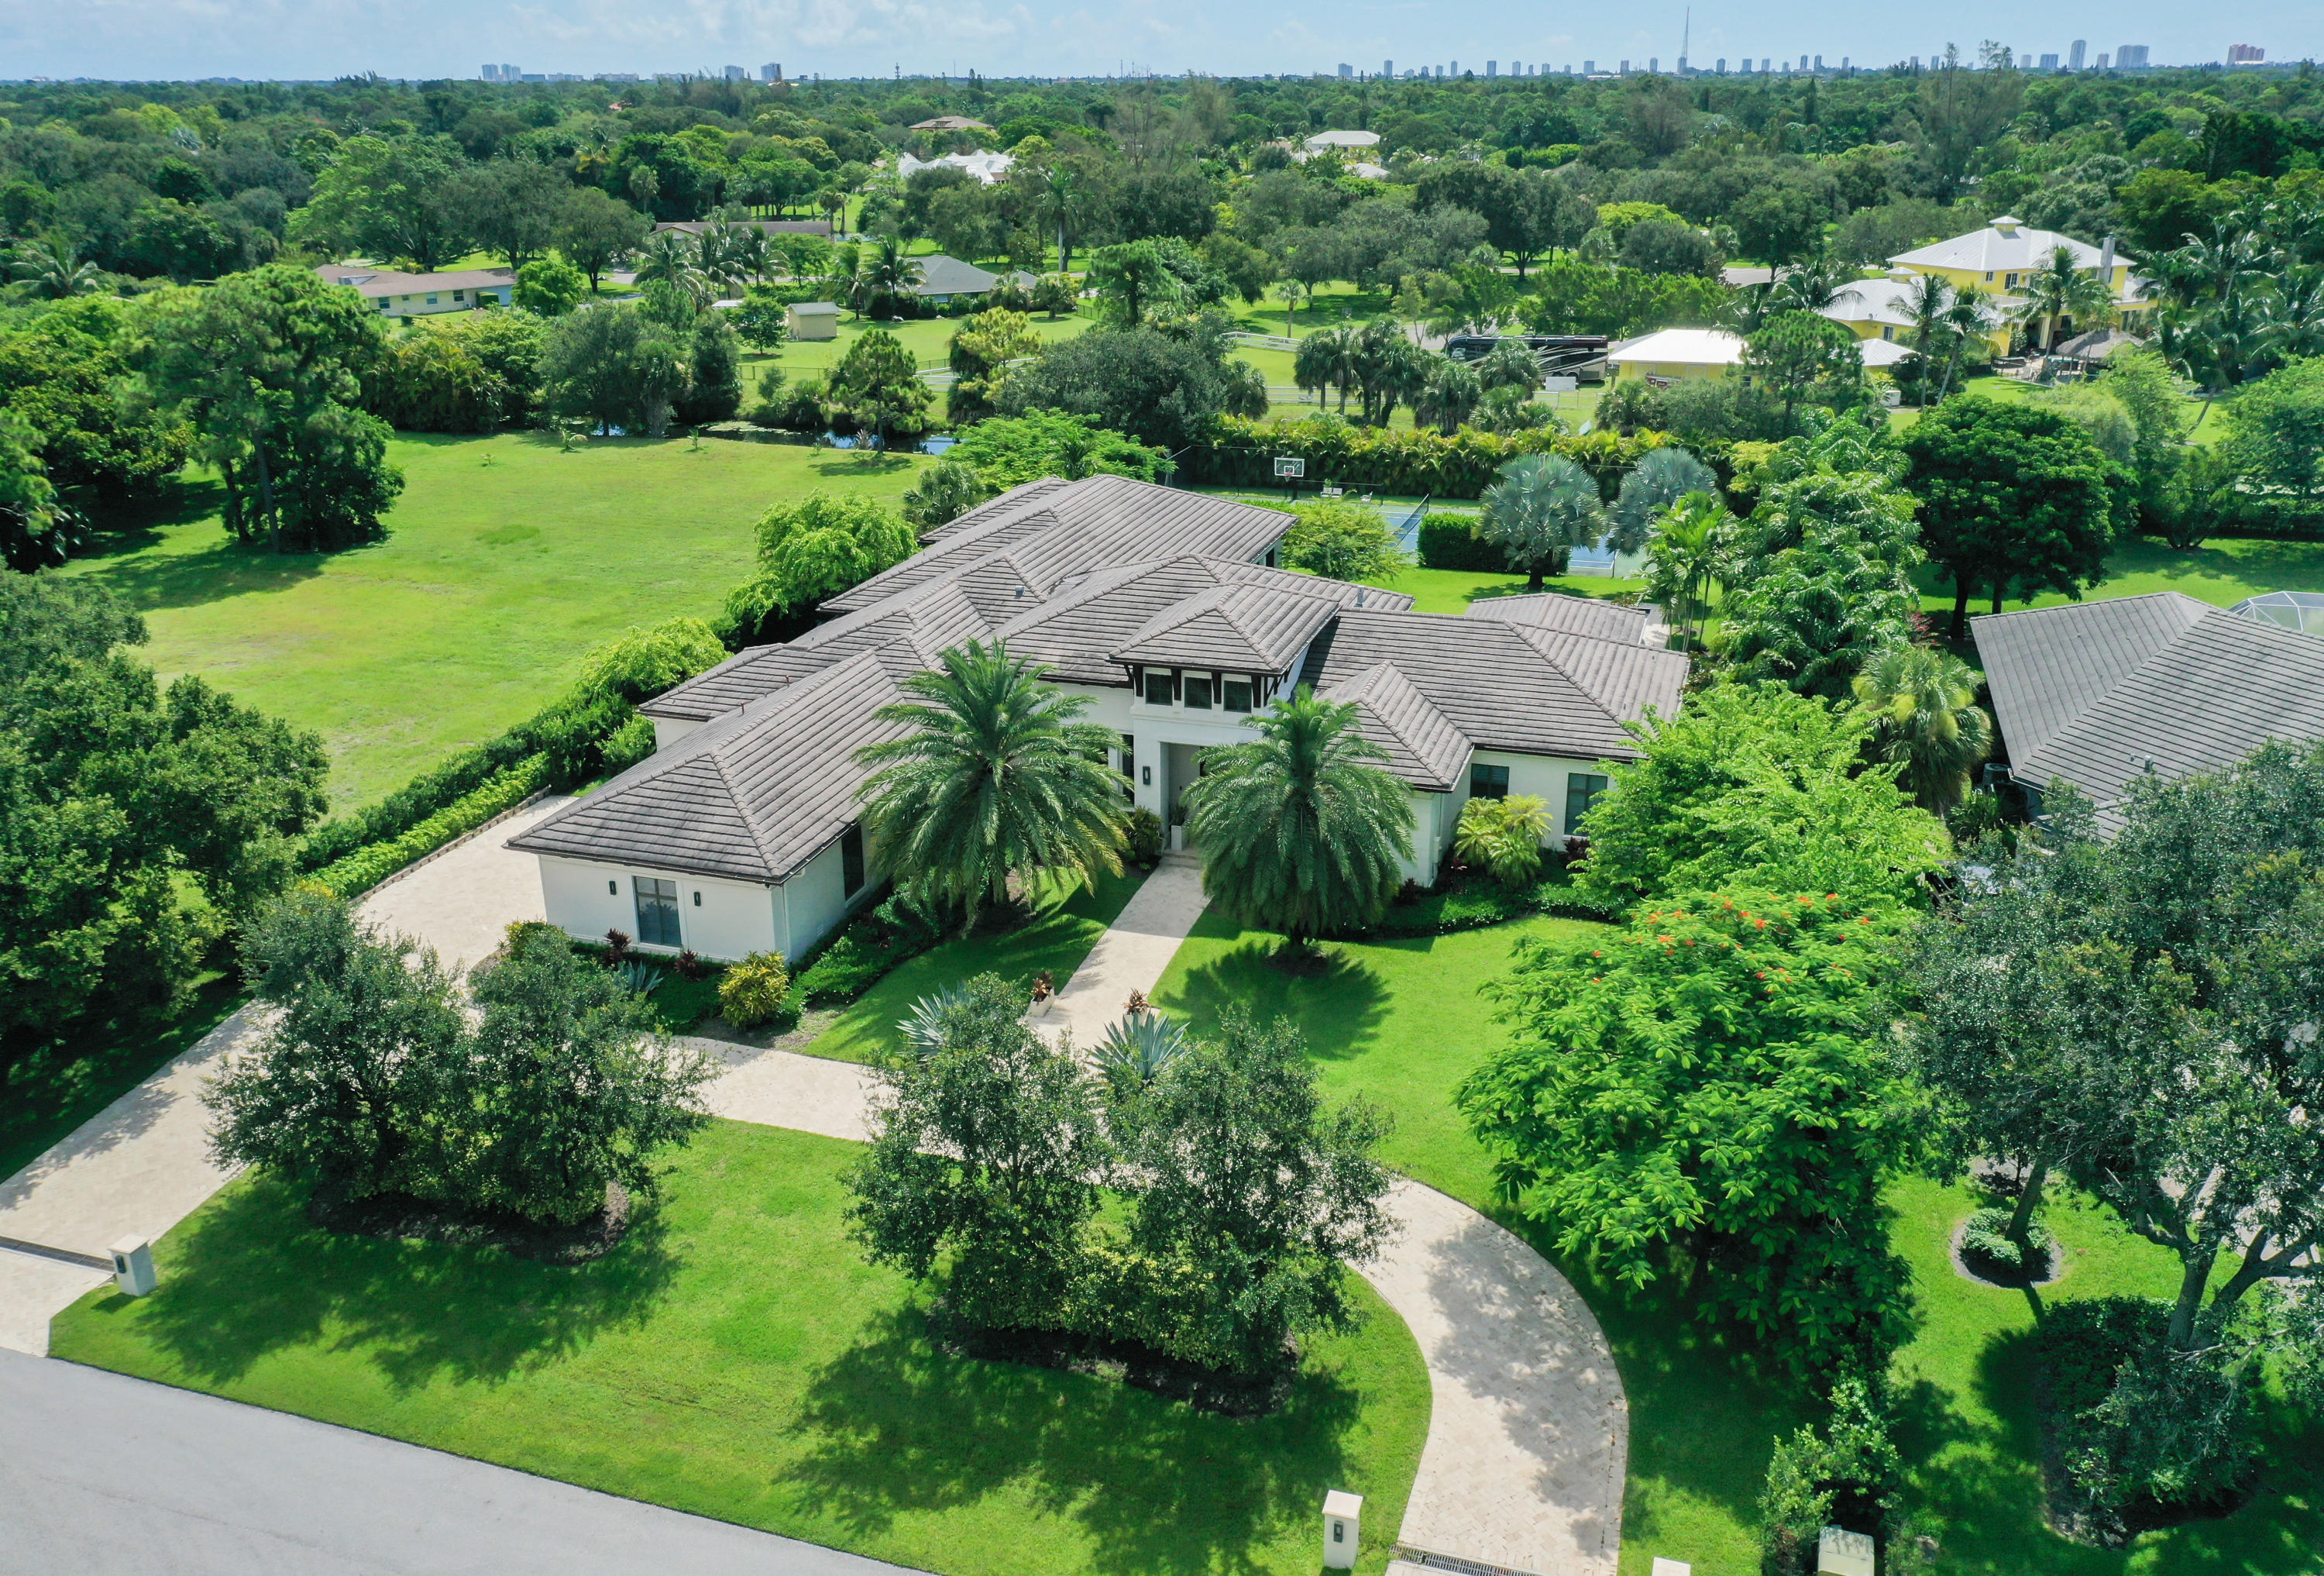 Steeplechase, Palm Beach Gardens, FL Homes for Sale & Real Estate